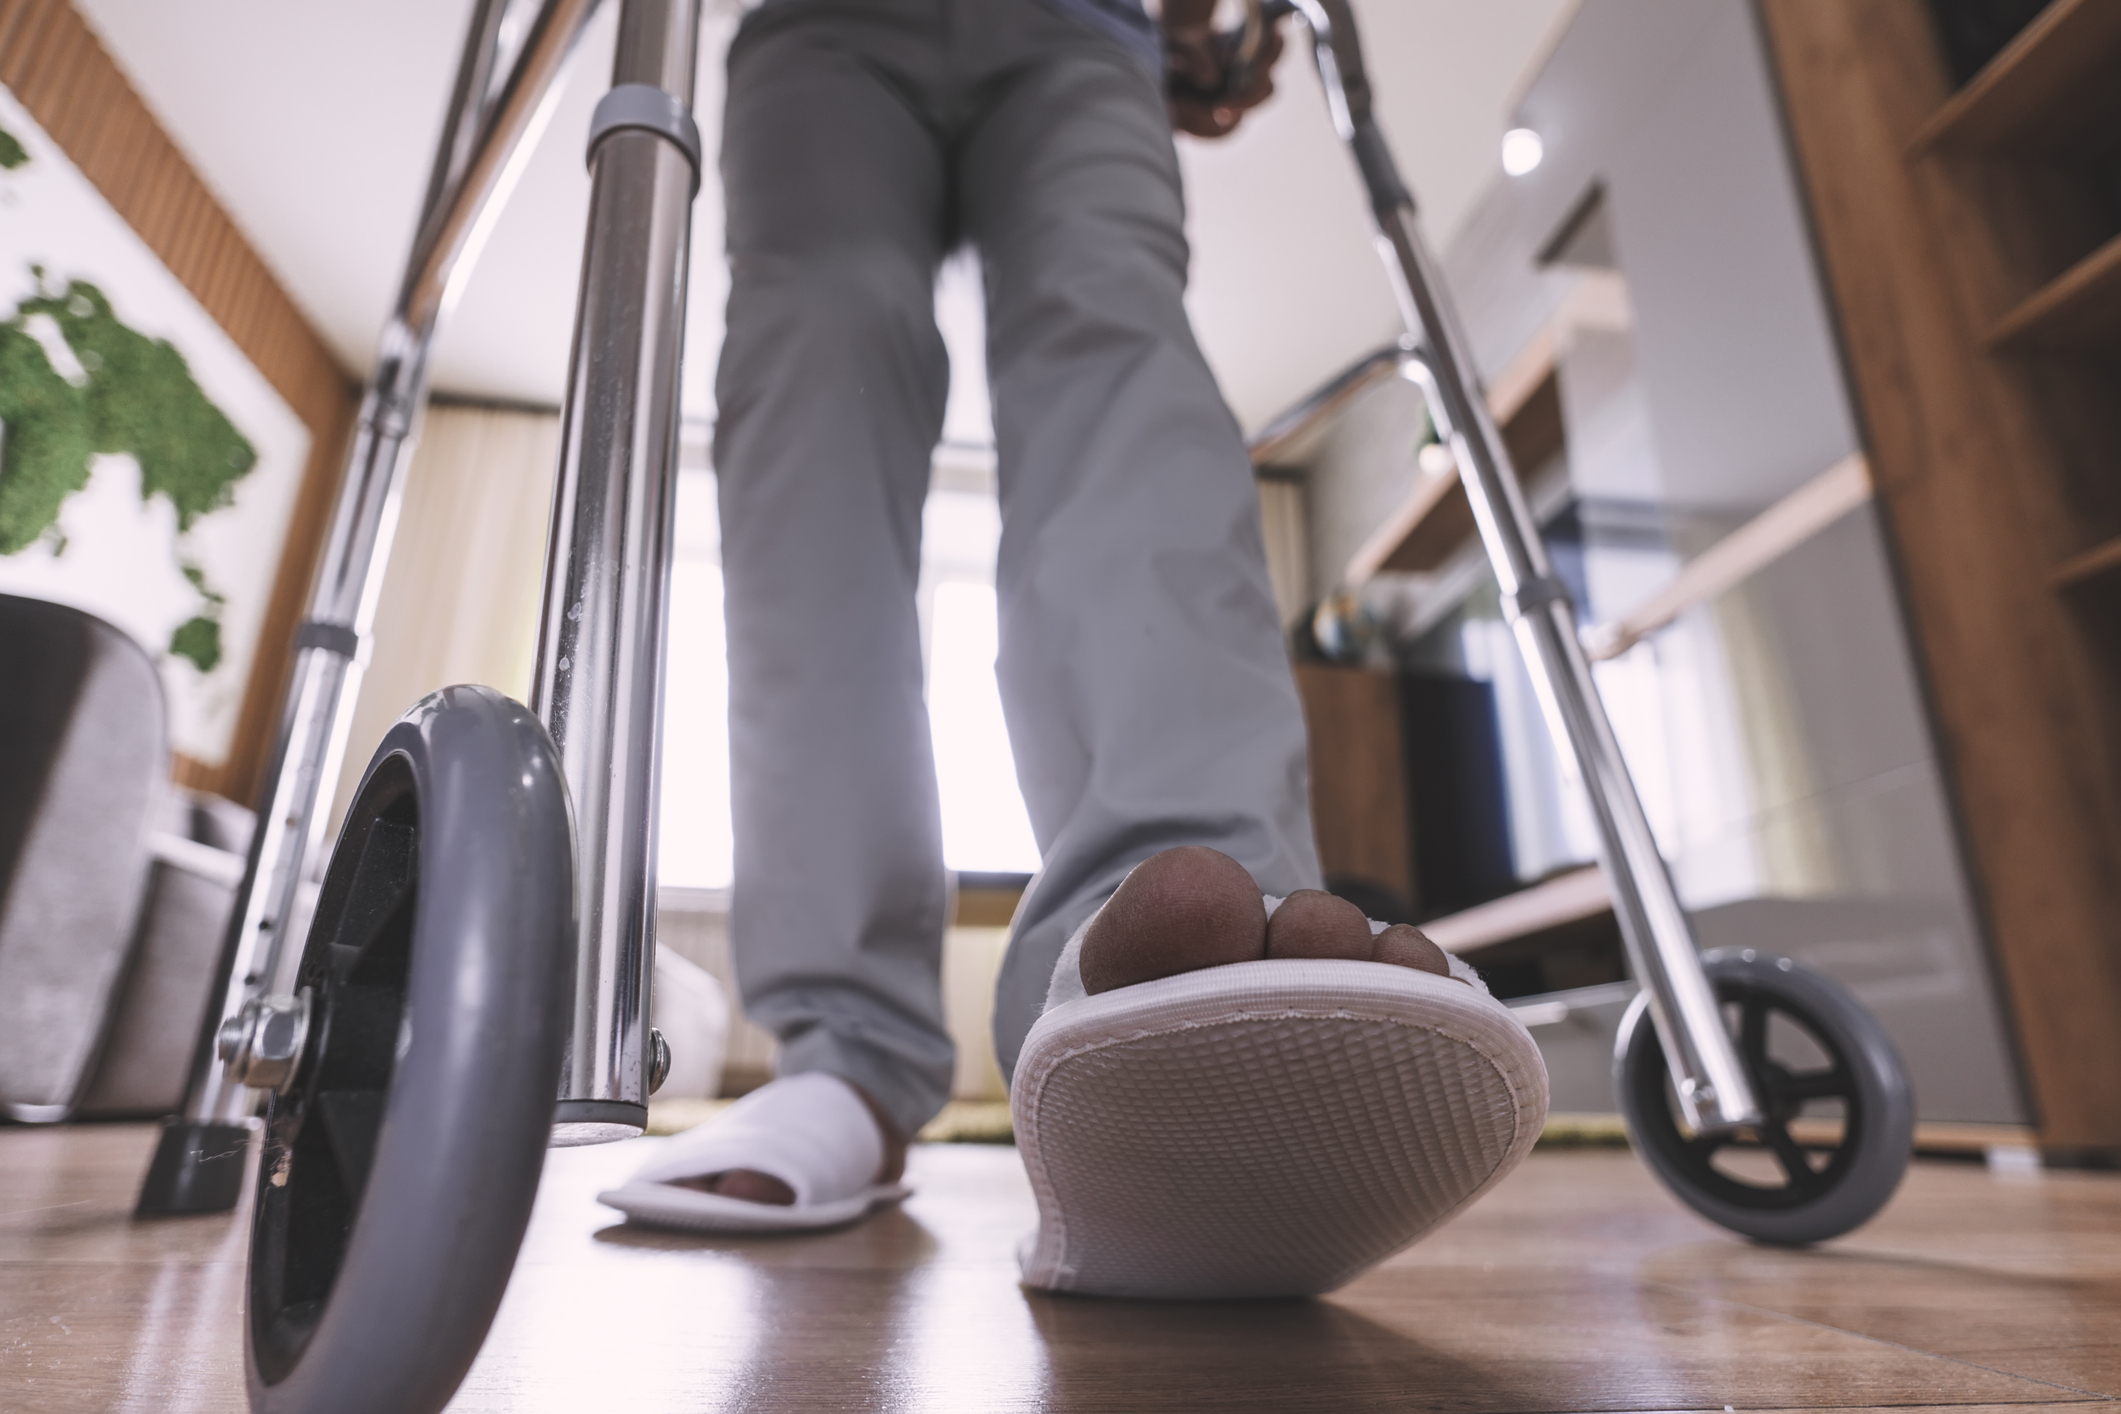 Closeup of white slippers and gray pants as a person uses a walker to navigate around their home